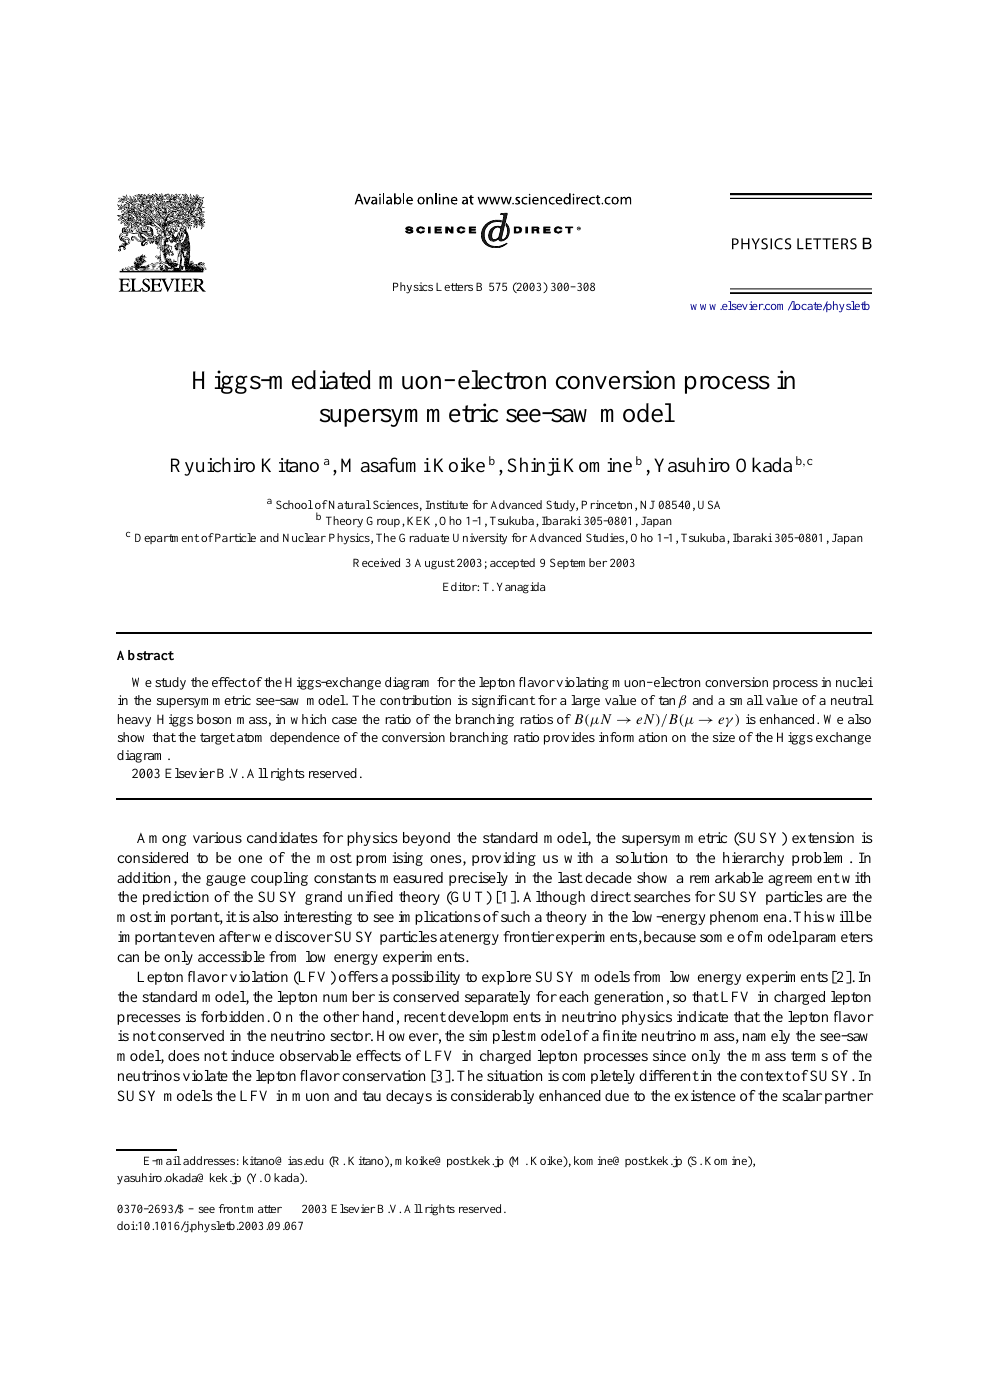 Higgs Mediated Muon Electron Conversion Process In Supersymmetric See Saw Model Topic Of Research Paper In Physical Sciences Download Scholarly Article Pdf And Read For Free On Cyberleninka Open Science Hub